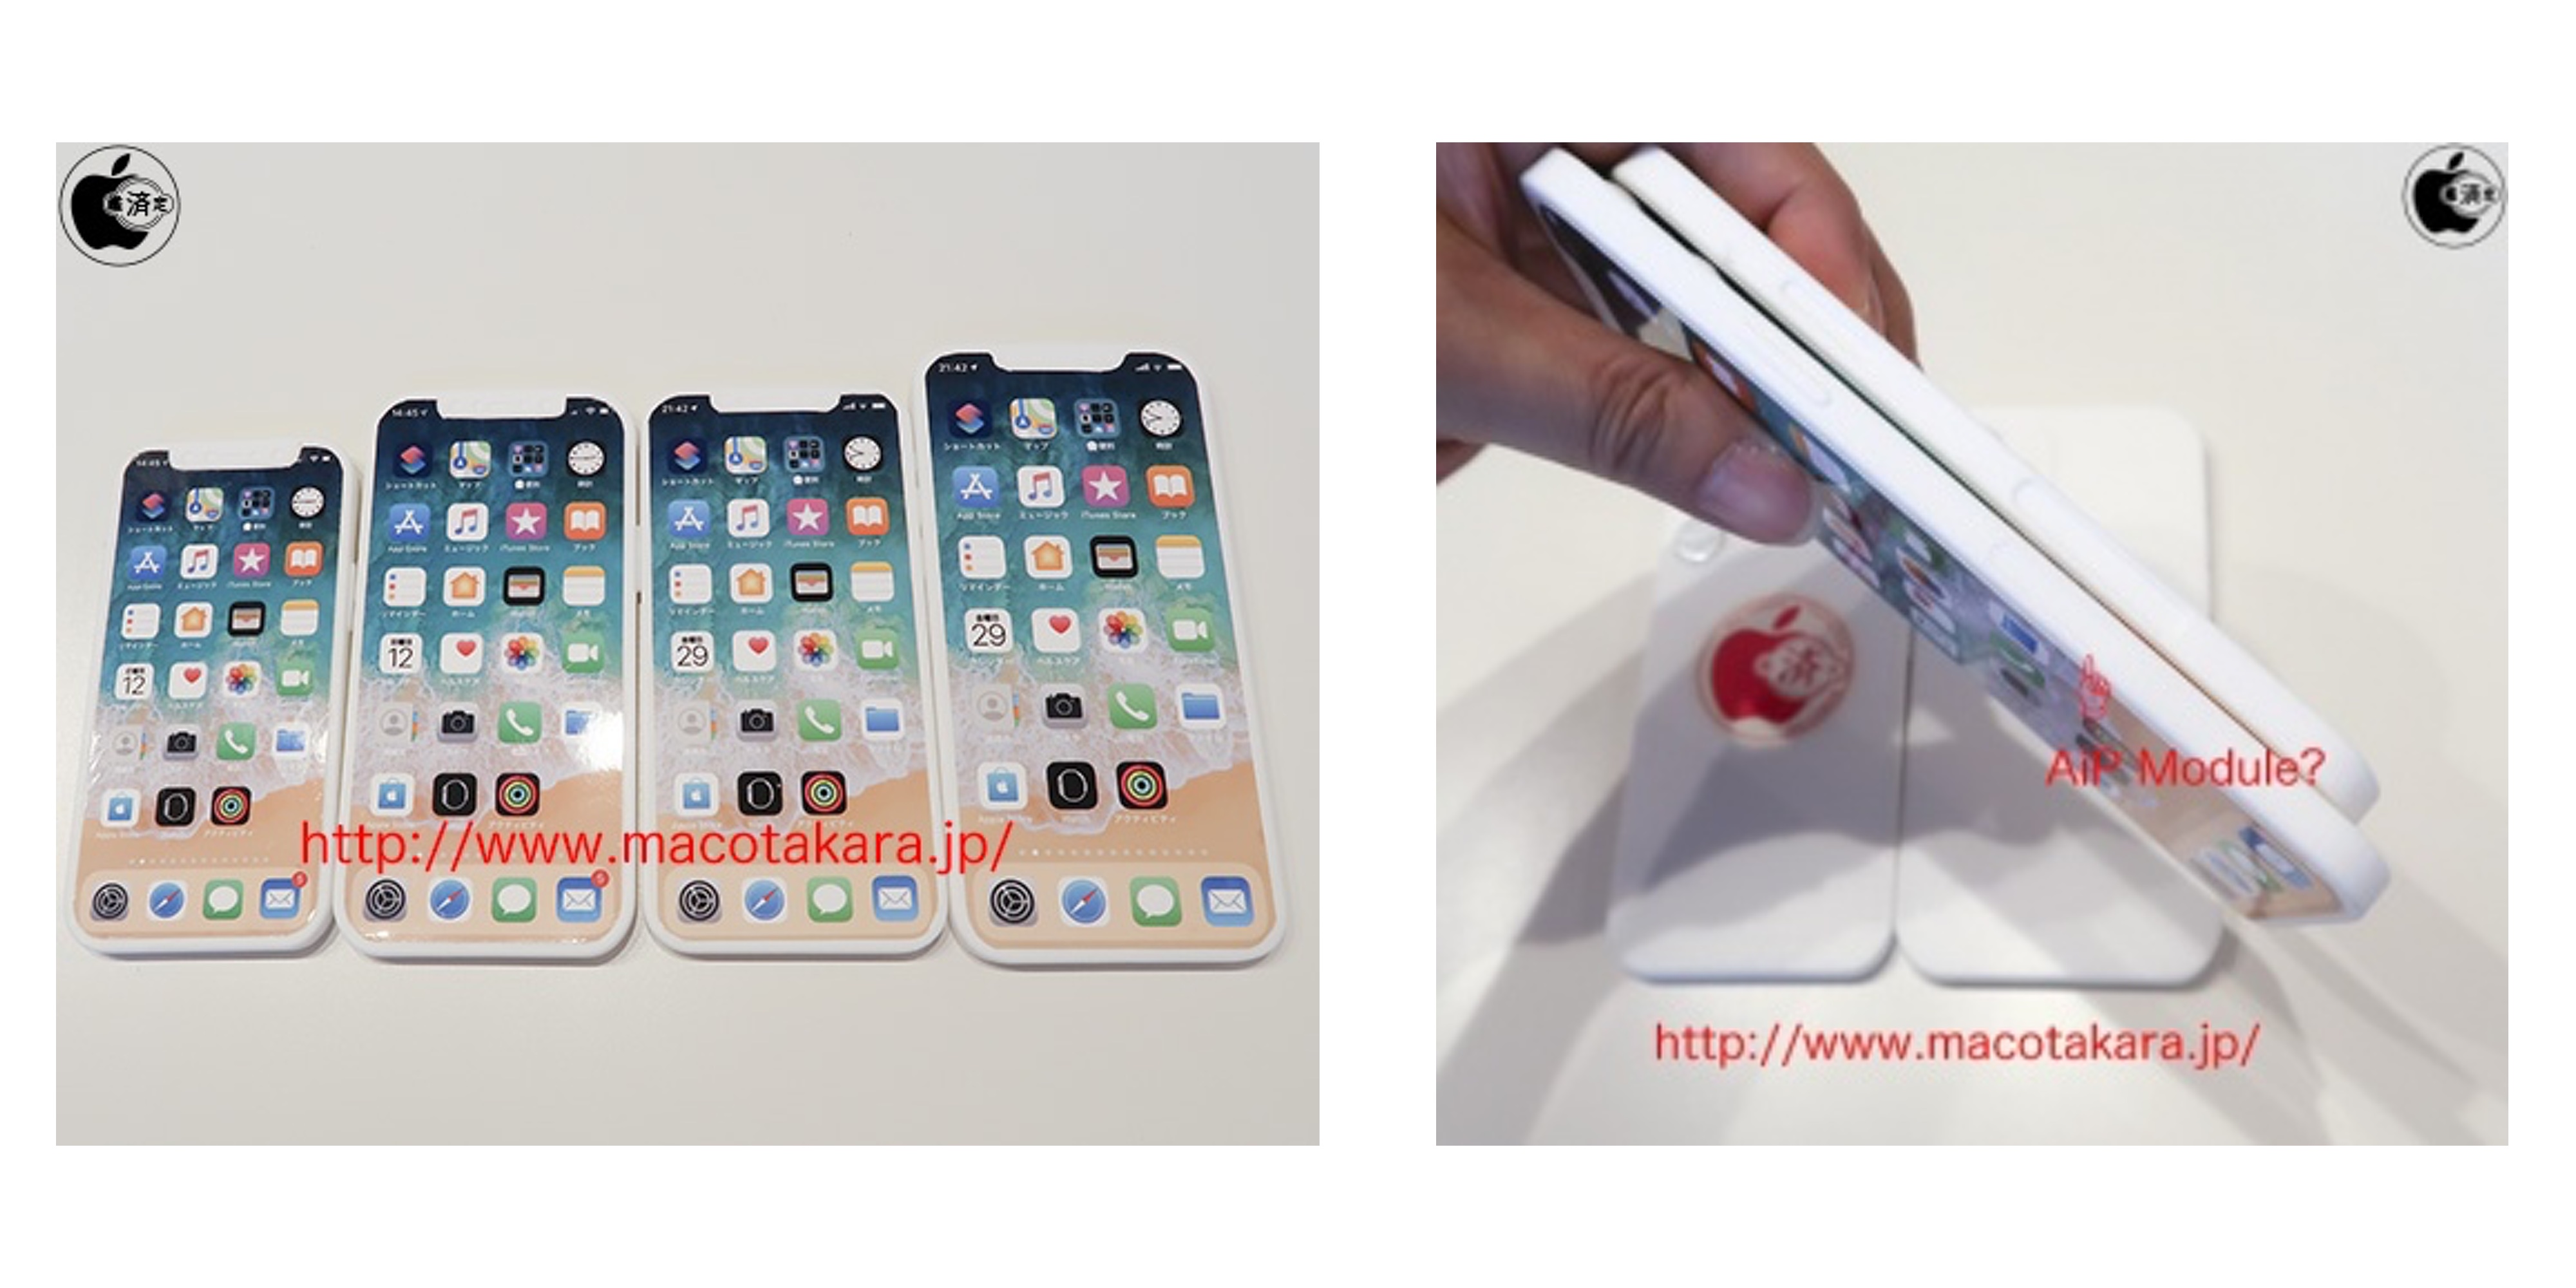 Images Claim To Show Iphone 12 Dummy Units With Relocated Sim Tray To Make Room For 5g Aip 9to5mac